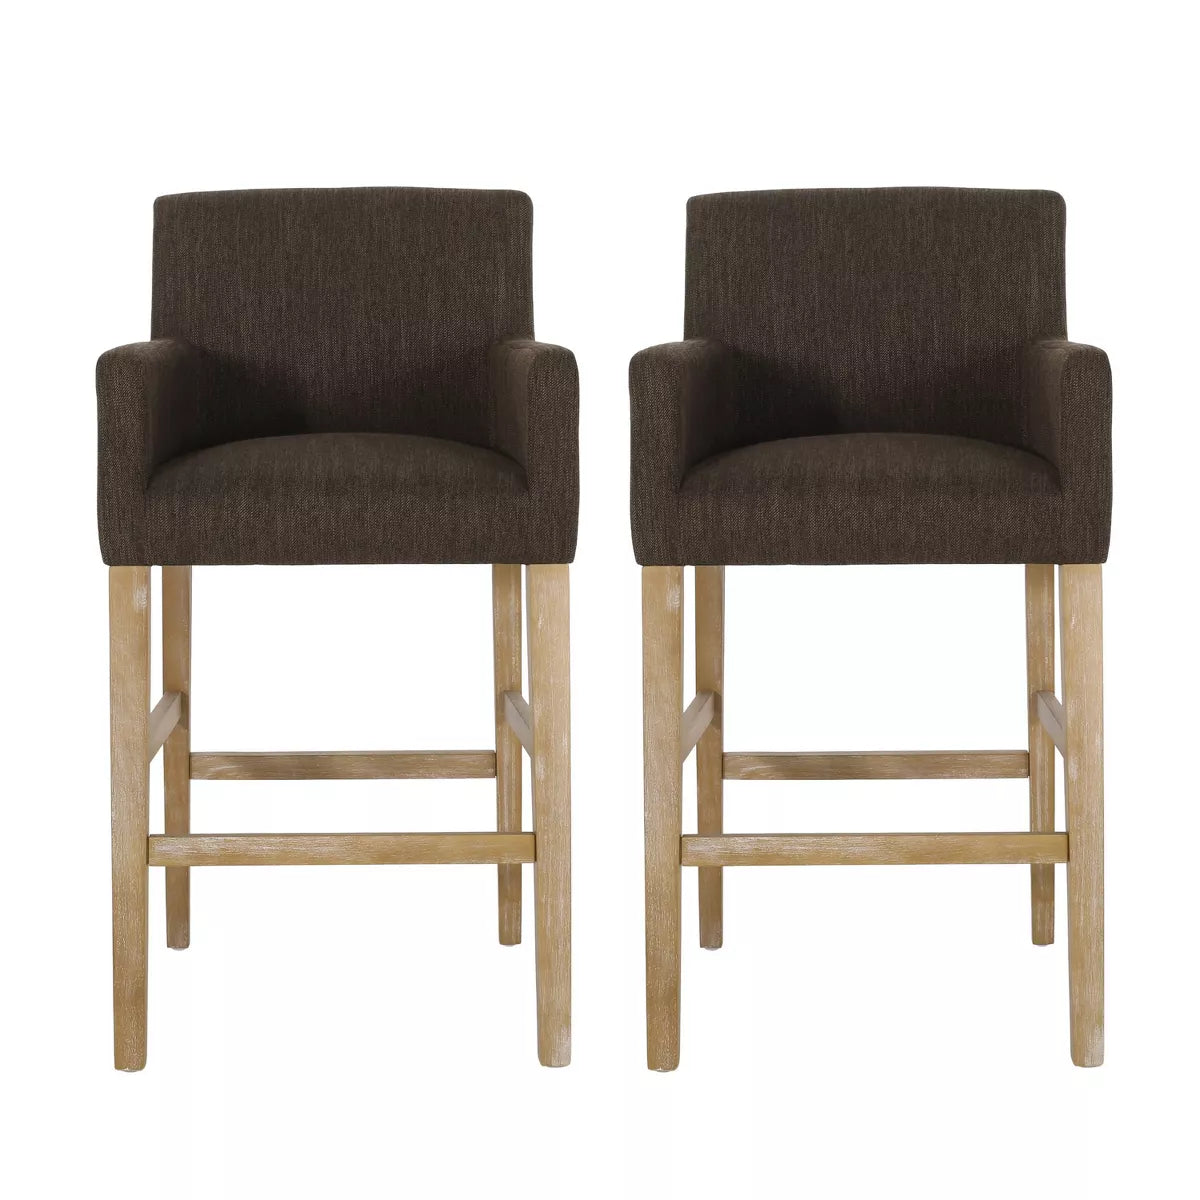 Set of 2 30.5" Armga Contemporary Fabric Upholstered Wood Counter Height Barstools - Christopher Knight Home